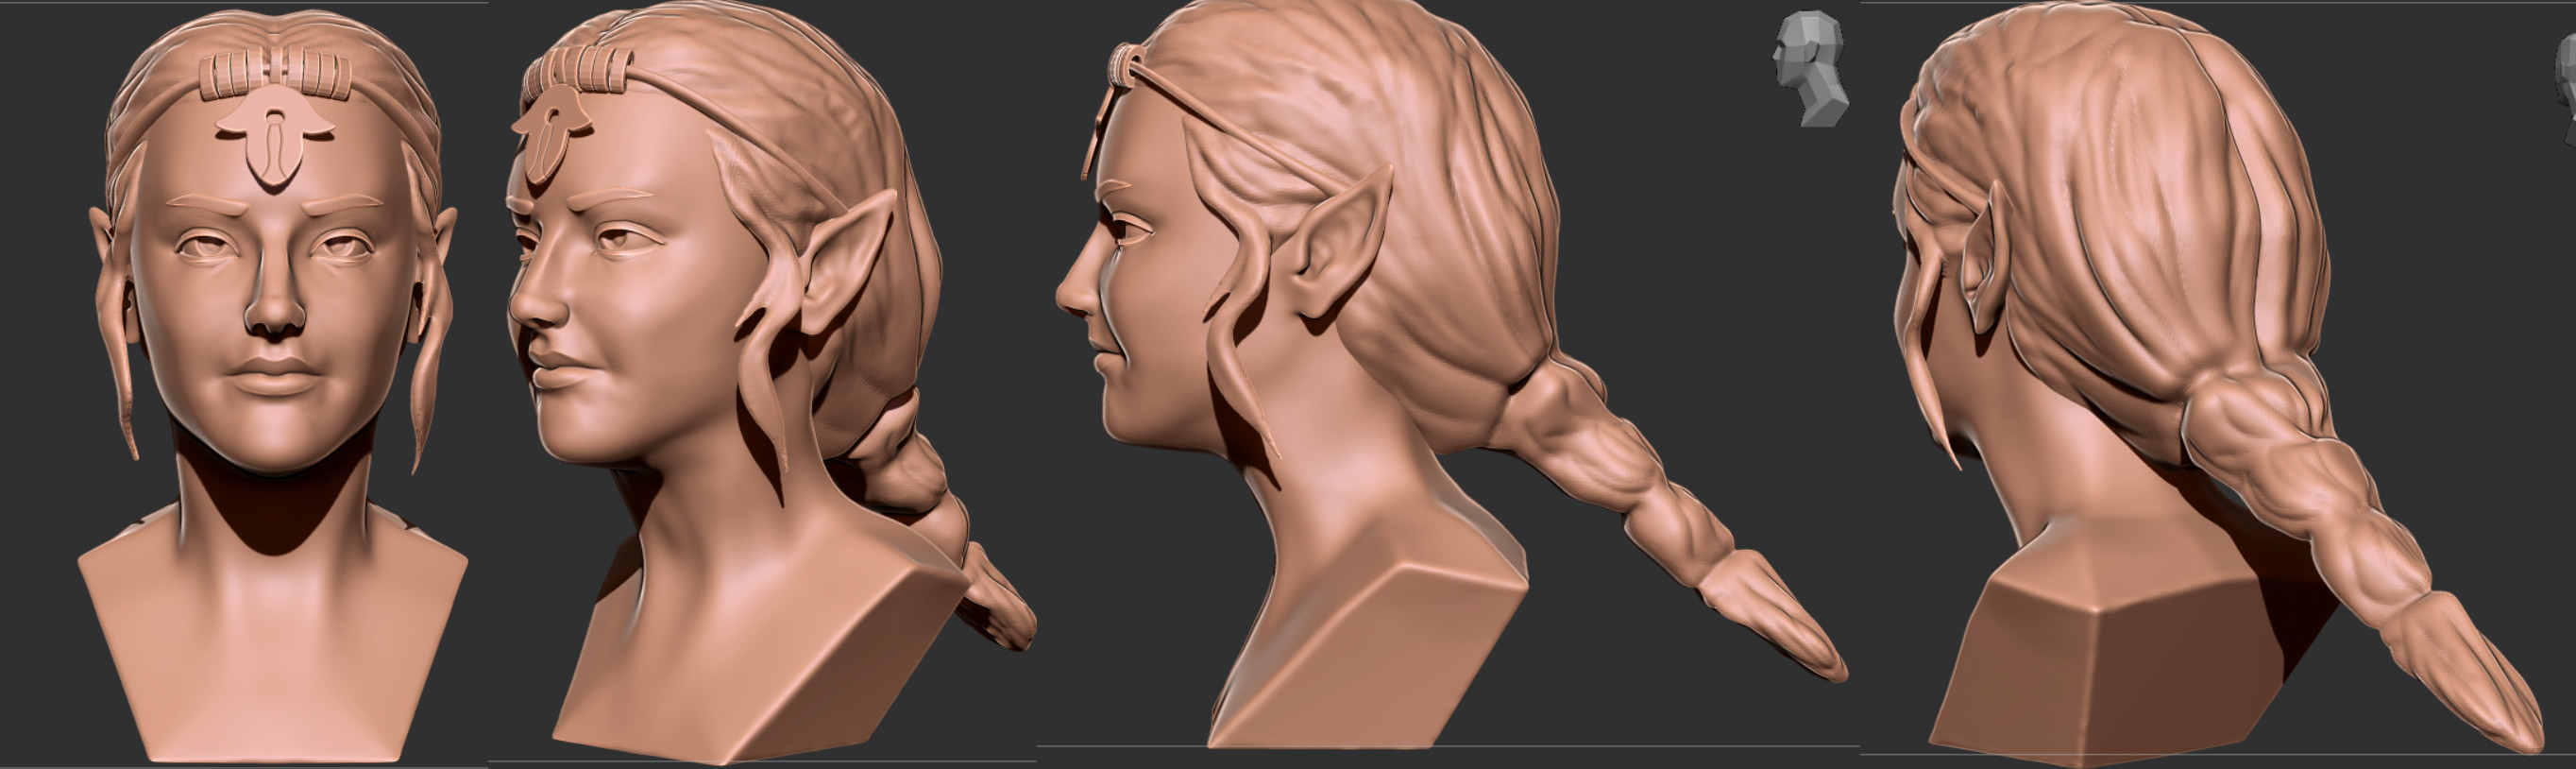 Clay renders from Zbrush with the face and initial hair blockout groom